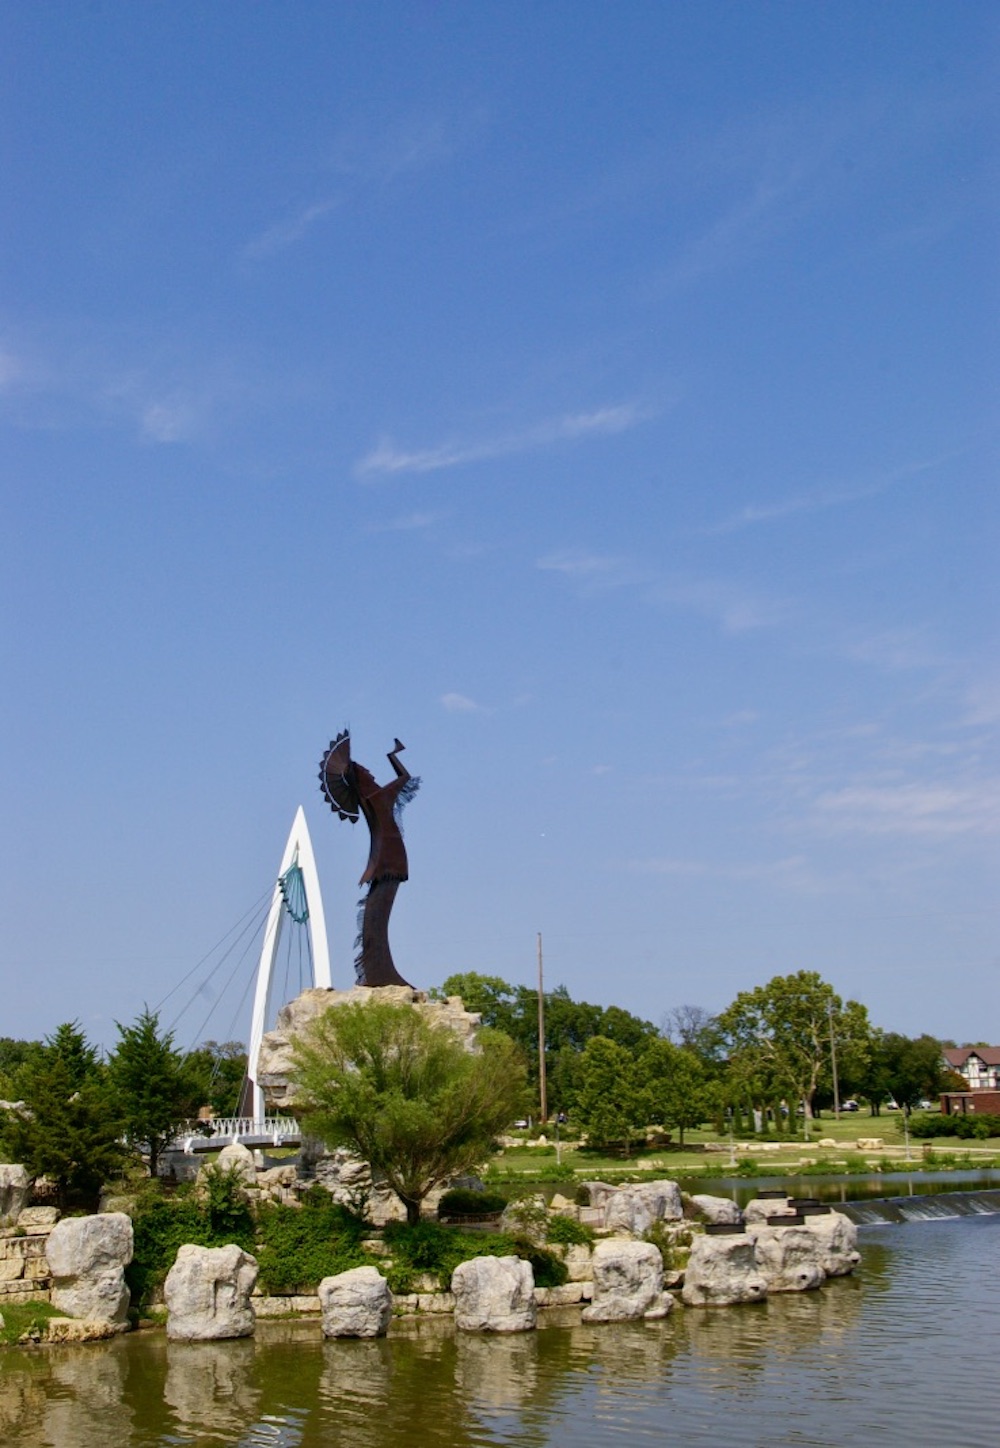 Large metal sculpture of a Native American warrior known as the Keeper of the Plains at the confluence of the Arkansas and Little Arkansas rivers in Wichita, Kansas